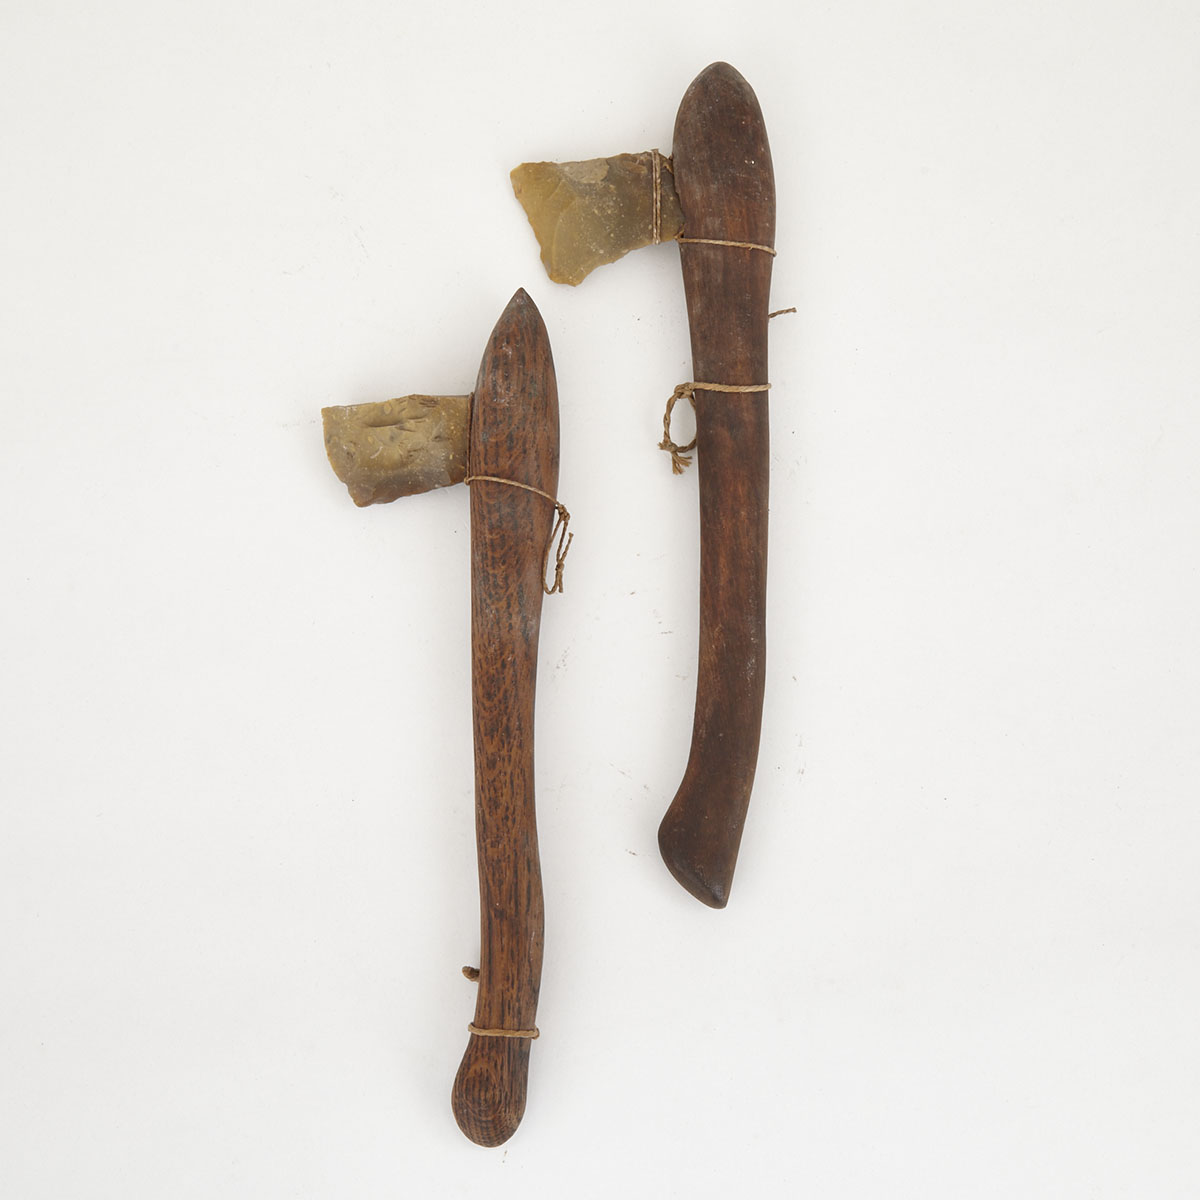 Two Axes with Stone Heads and Wooden Handles